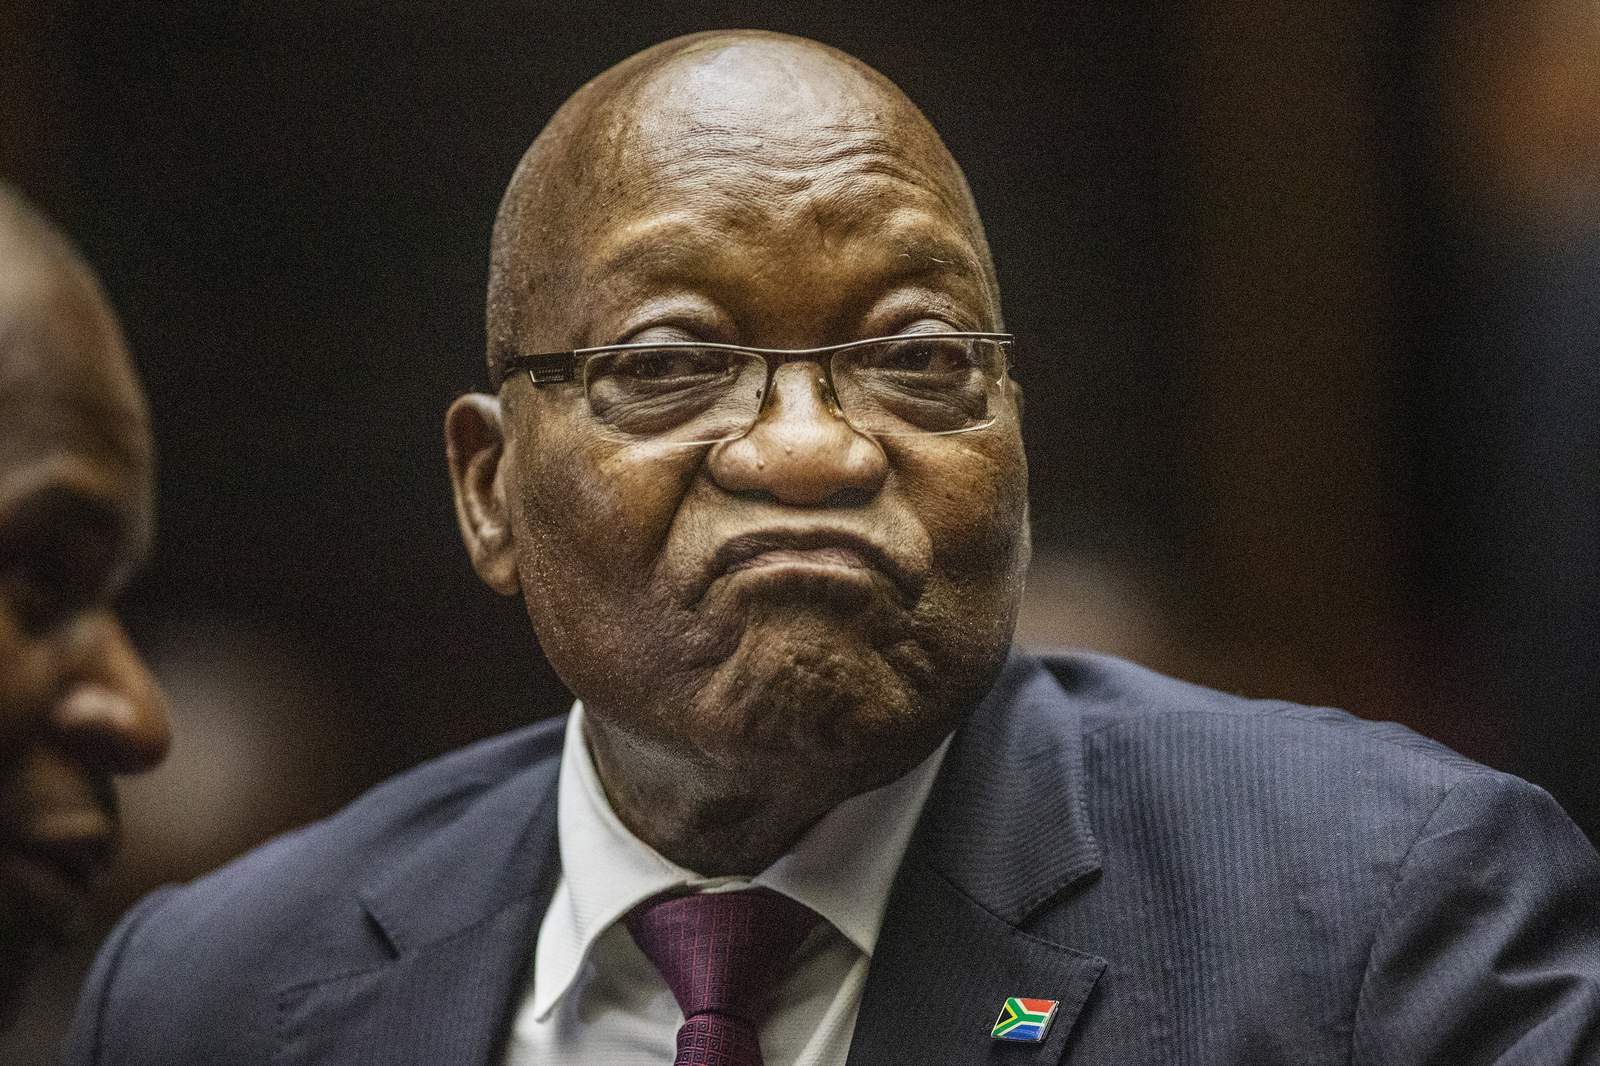 South Africa's ex-president Jacob Zuma must pay legal fees